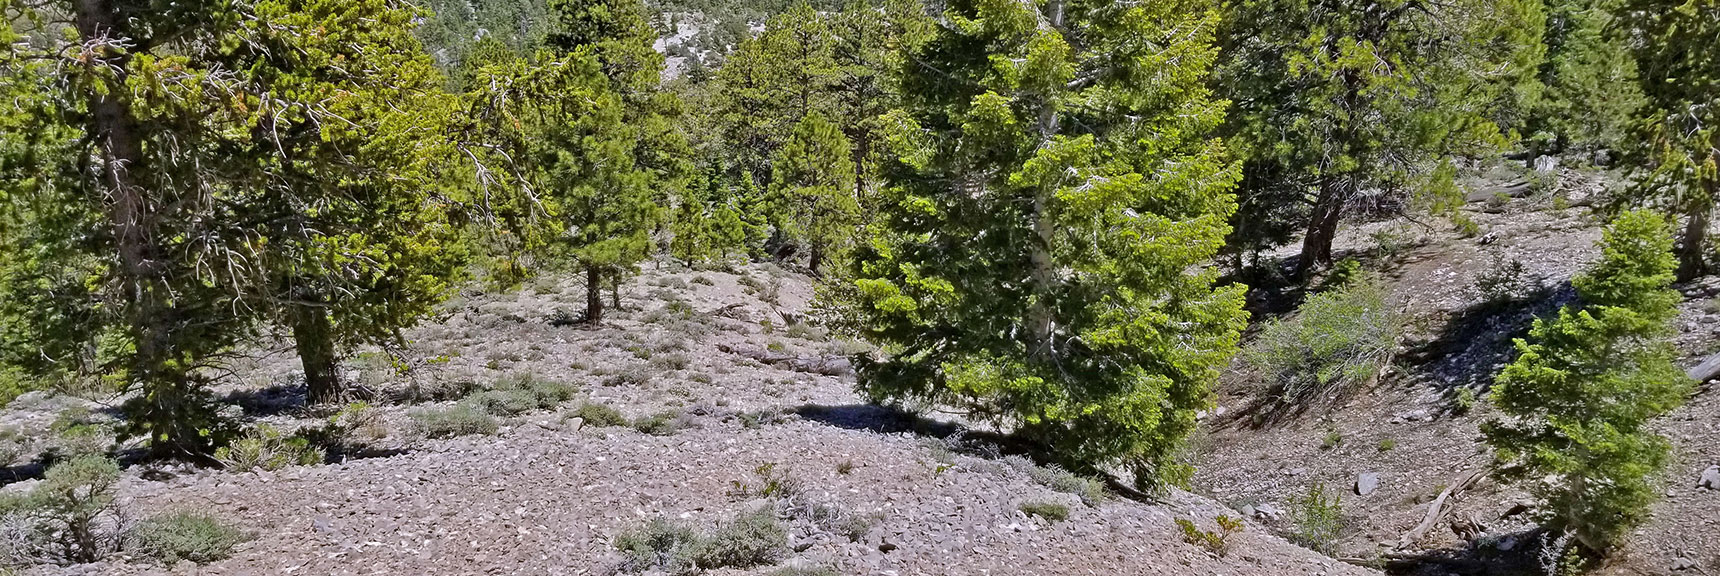 Descending Wash Gully Appears. Will Take This Down to the Upper Group Campground | Macks Peak | Mt Charleston Wilderness | Spring Mountains, Nevada